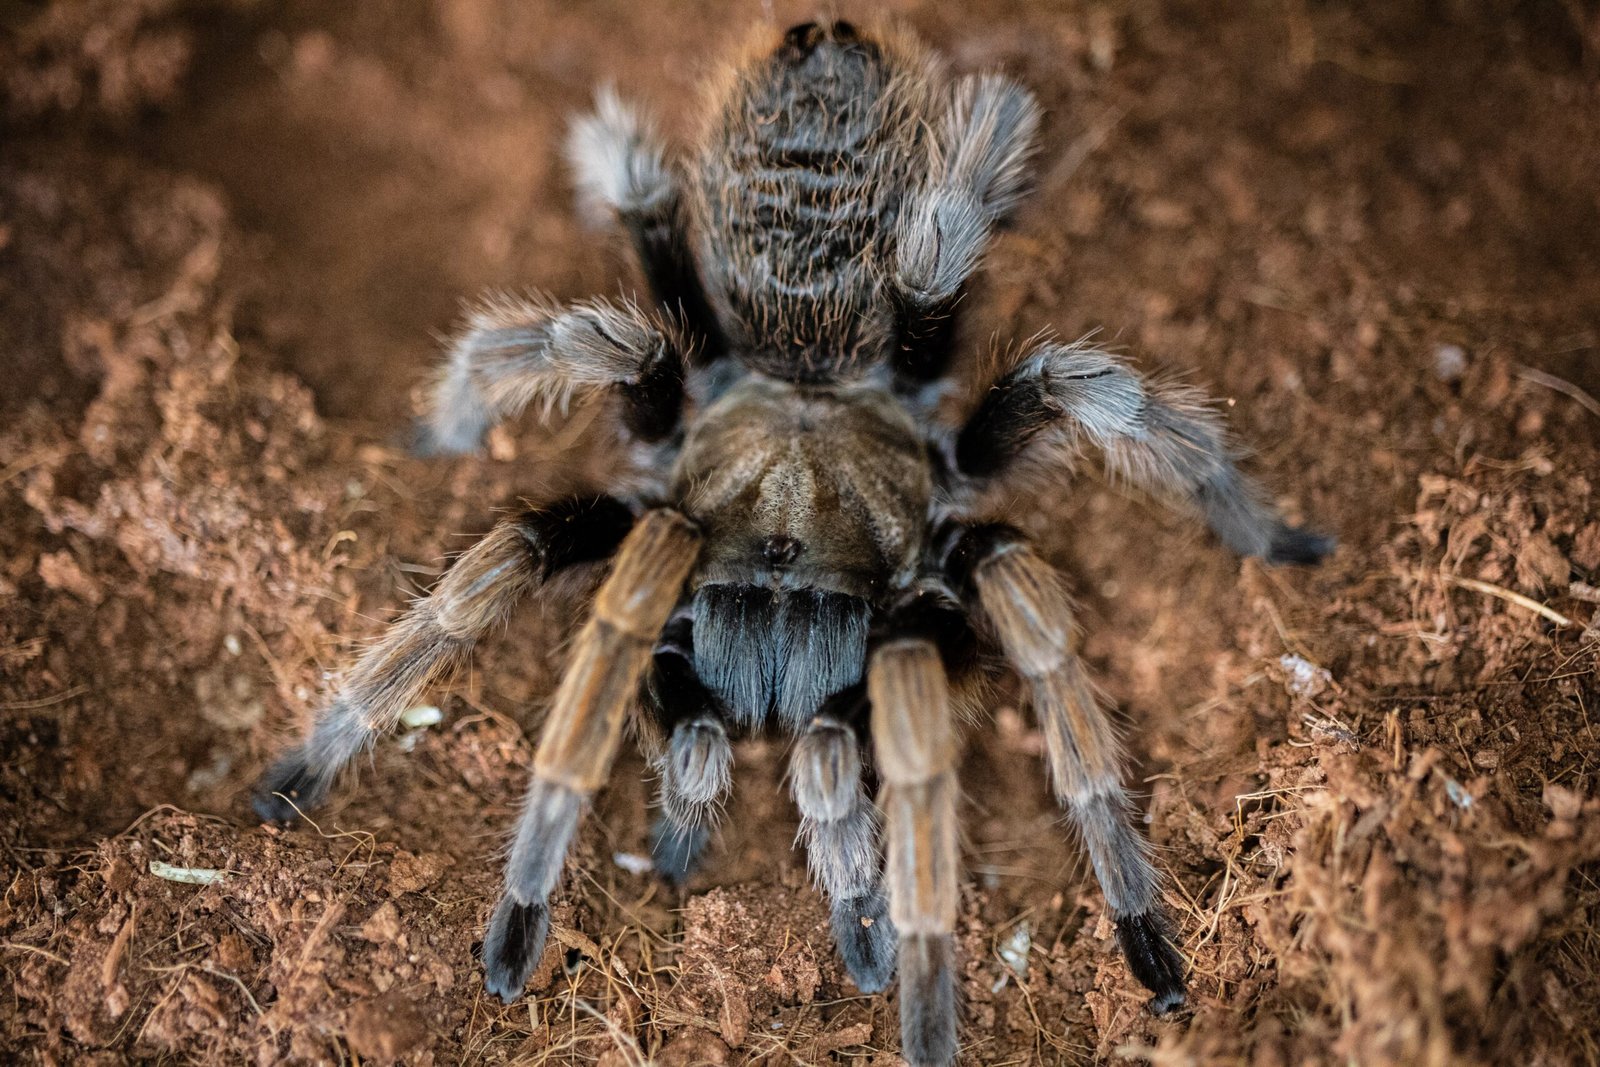 Are There Specific Mammals That Dig Into Burrows To Prey On Tarantulas?